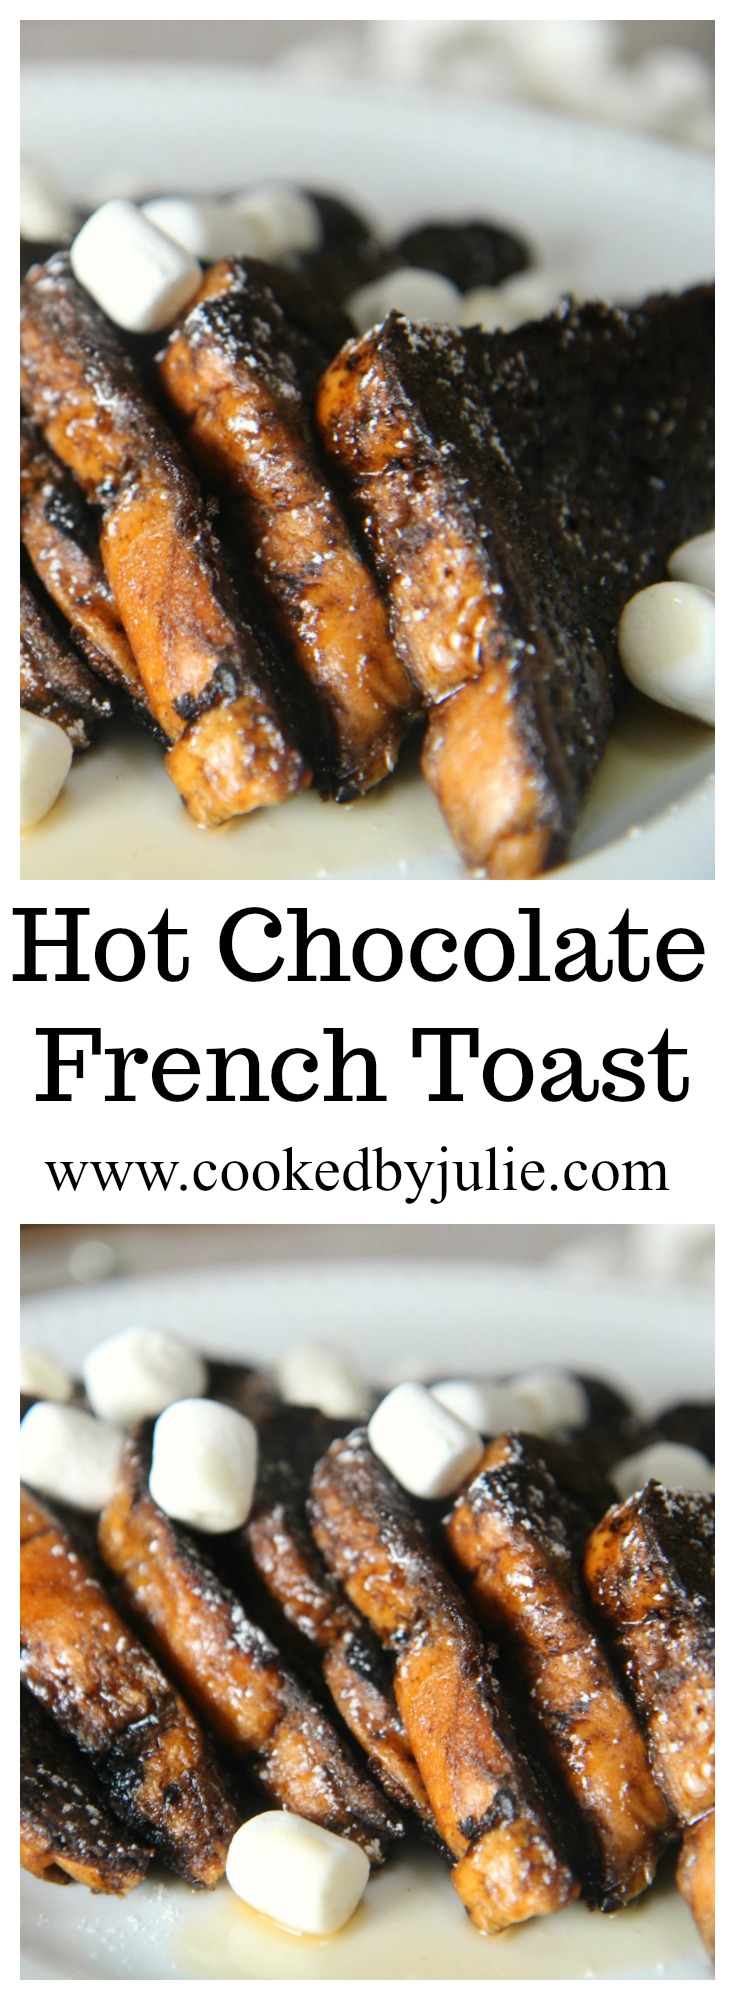 Learn how to make Hot Chocolate French Toast at cookedbyjulie.com